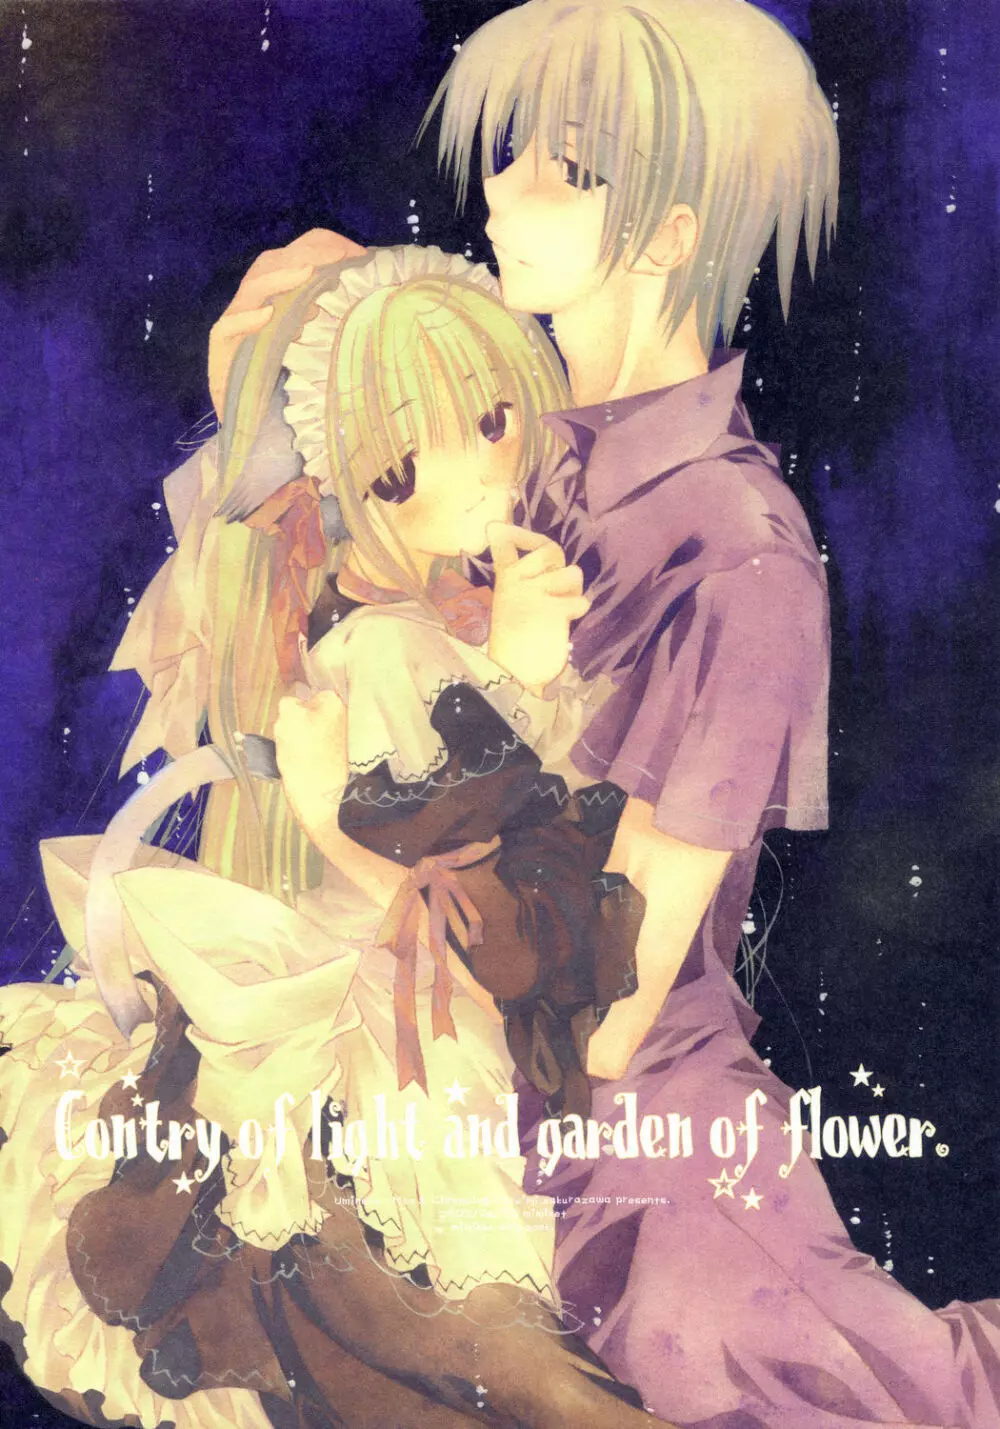 Country of light and garden of flower 1ページ